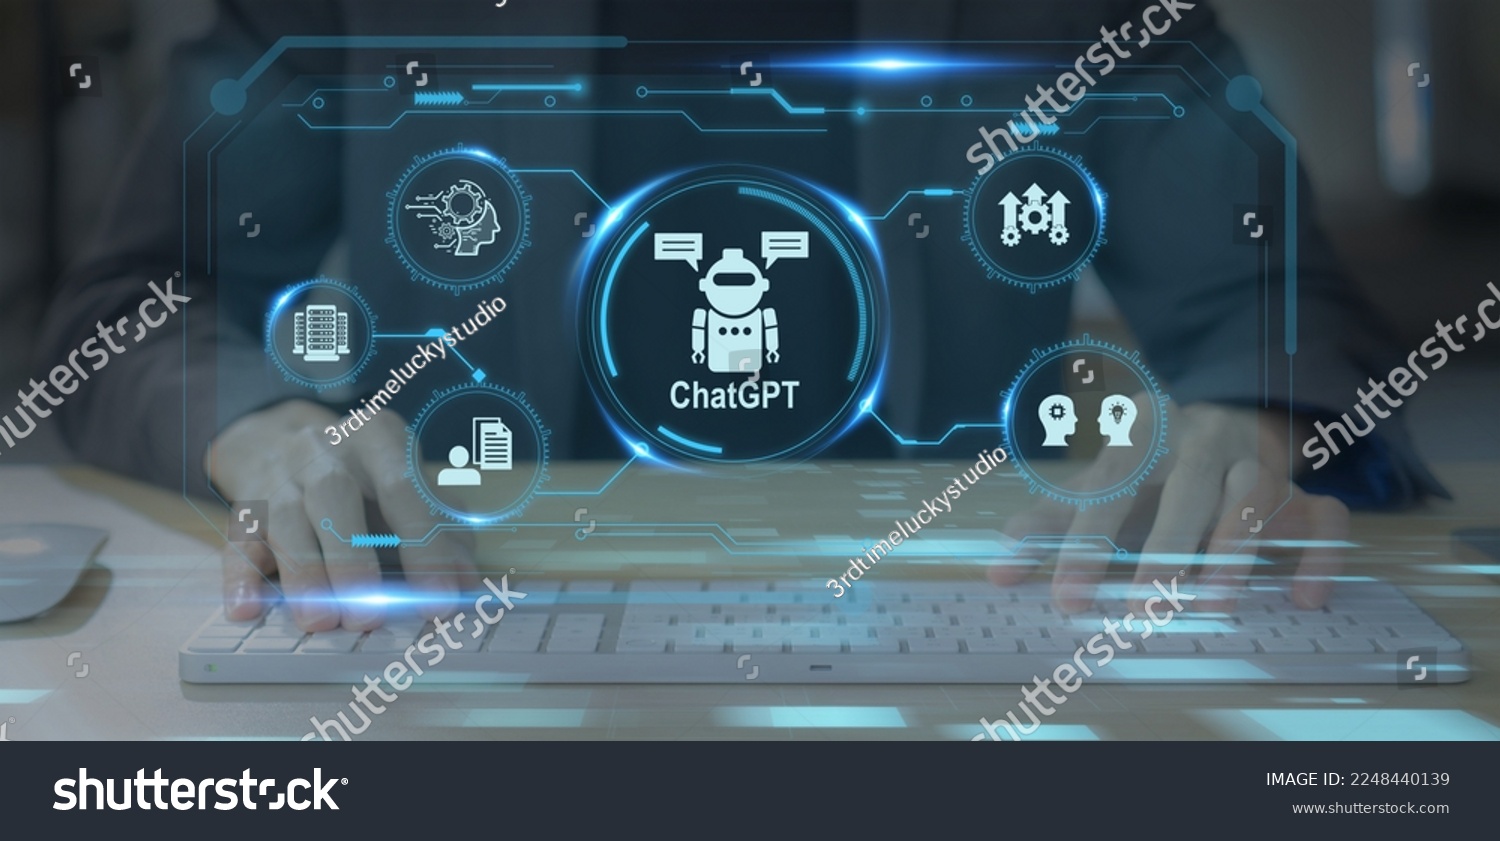 ChatGPT, using and chatting artificial intelligence chatbot developed by OpenAI. Digital chatbot, chatGPT, robot application, conversation assistant concept. Optimizing language models for dialogue. #2248440139